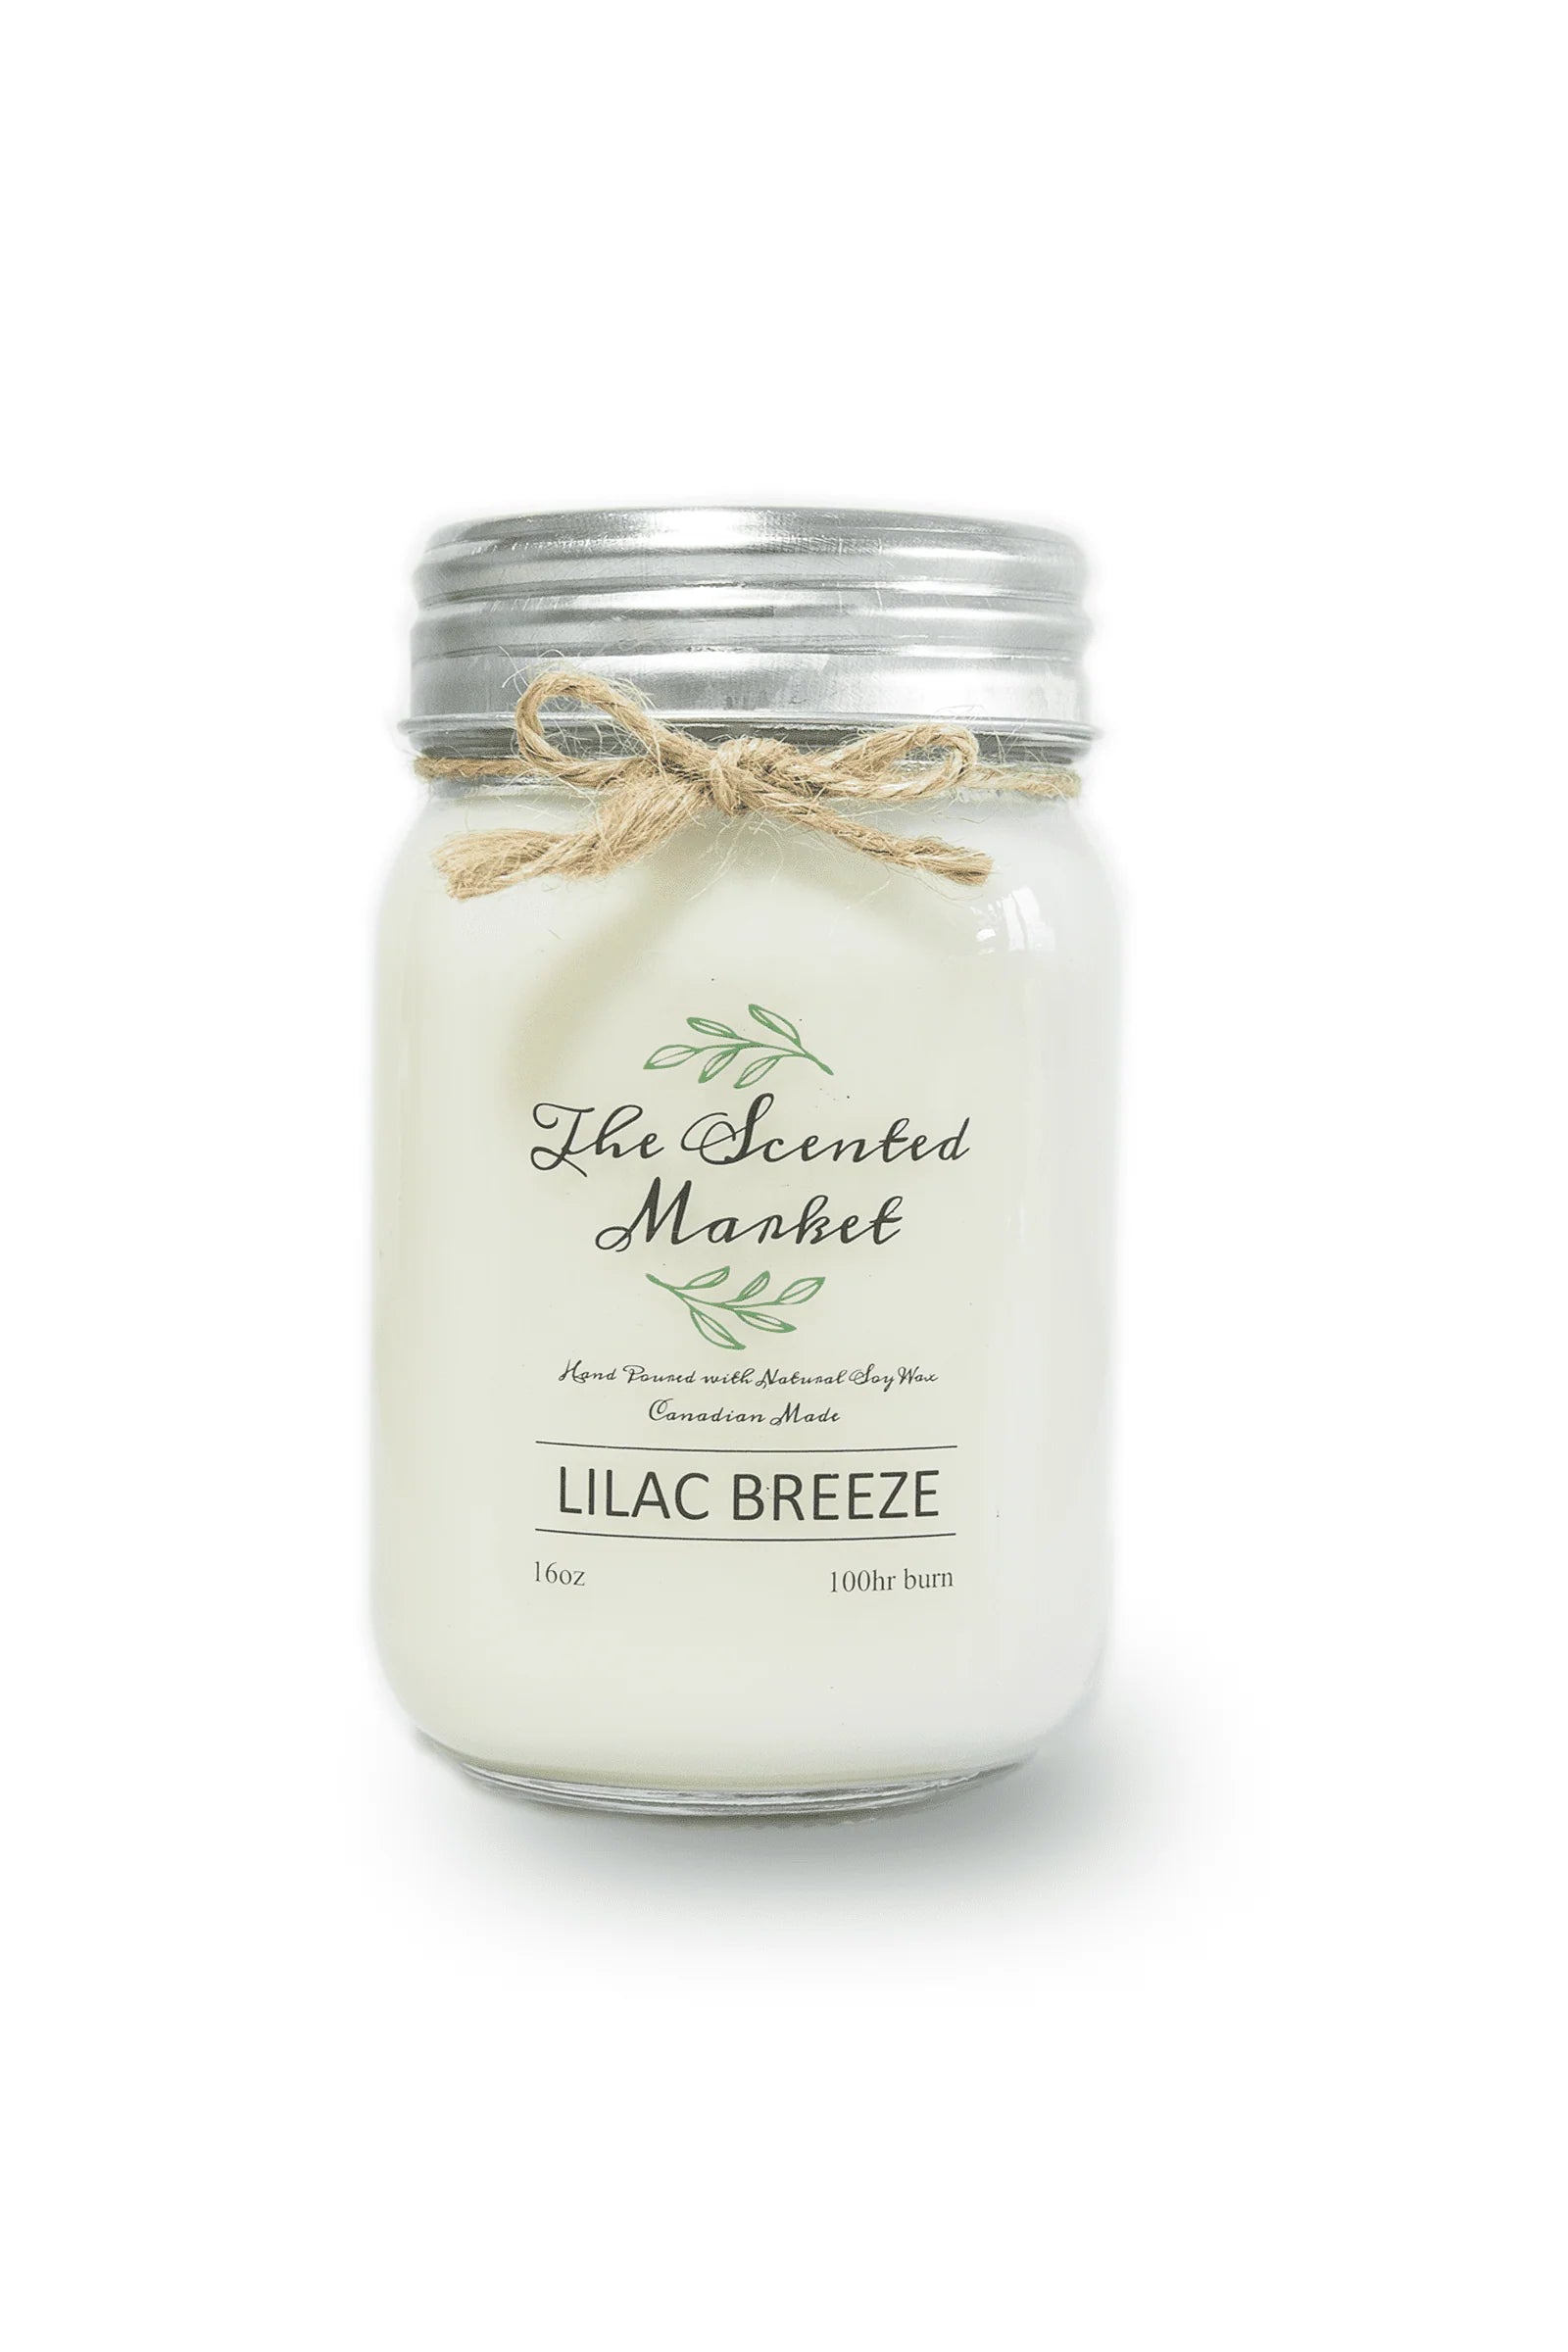 The Scented Market - Lilac Breeze Soy Wax Candle